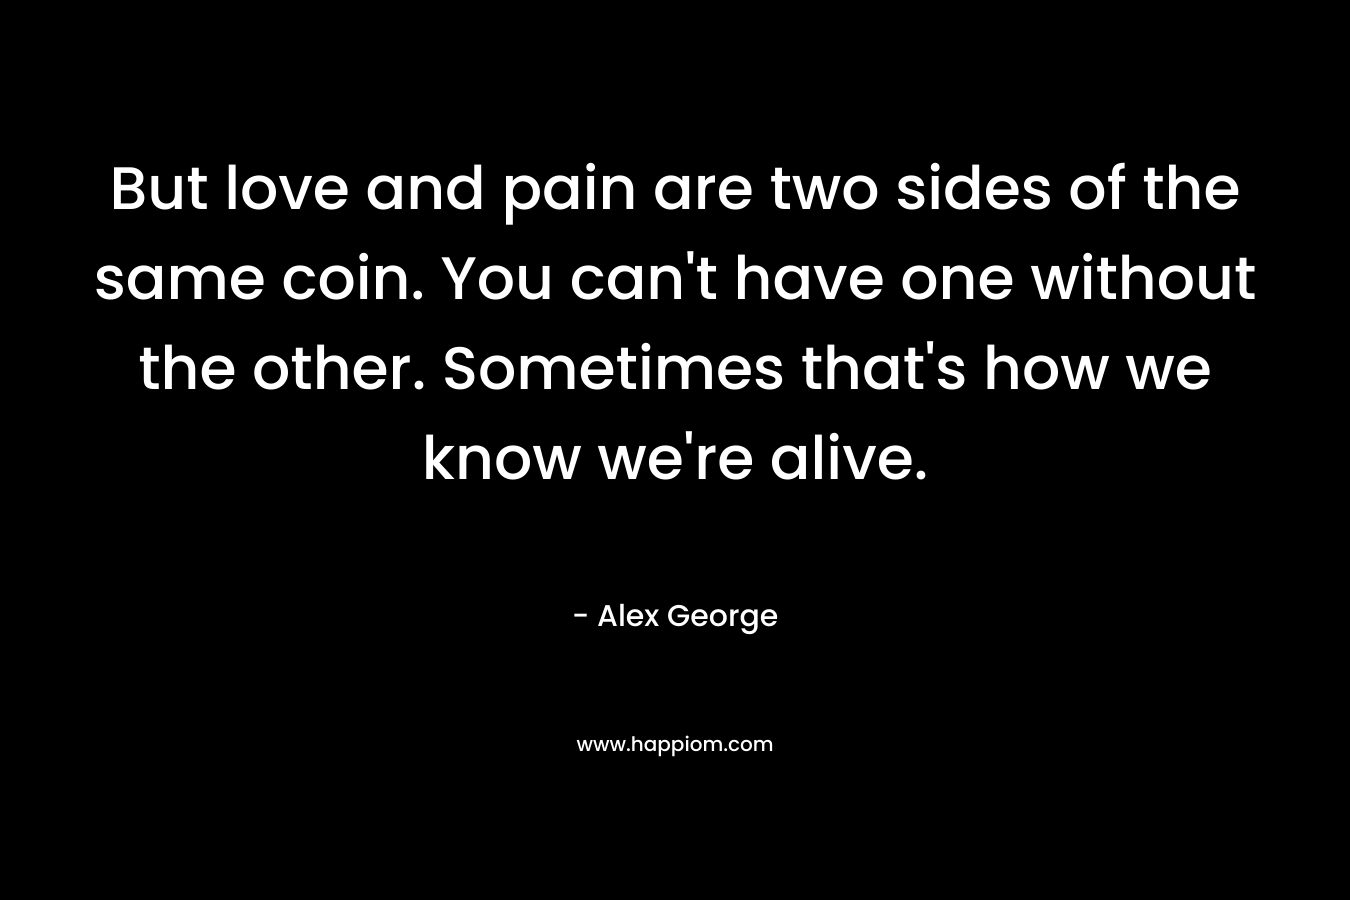 But love and pain are two sides of the same coin. You can’t have one without the other. Sometimes that’s how we know we’re alive. – Alex George